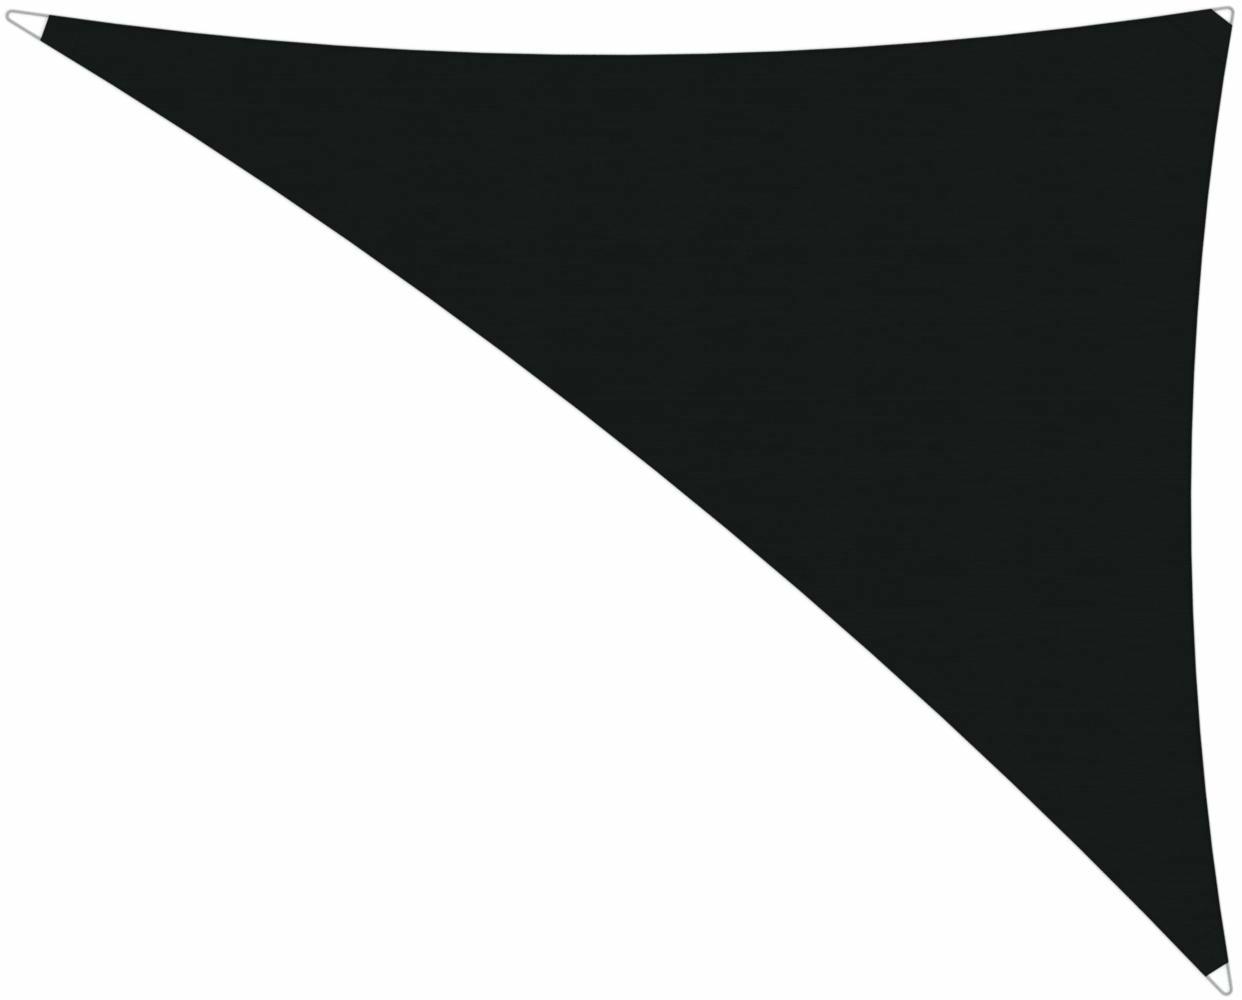 Ingenua shade sail Triangle 4 x 5 x 6,4 m, for outdoor use. Colour of the fabric shade sail Black.